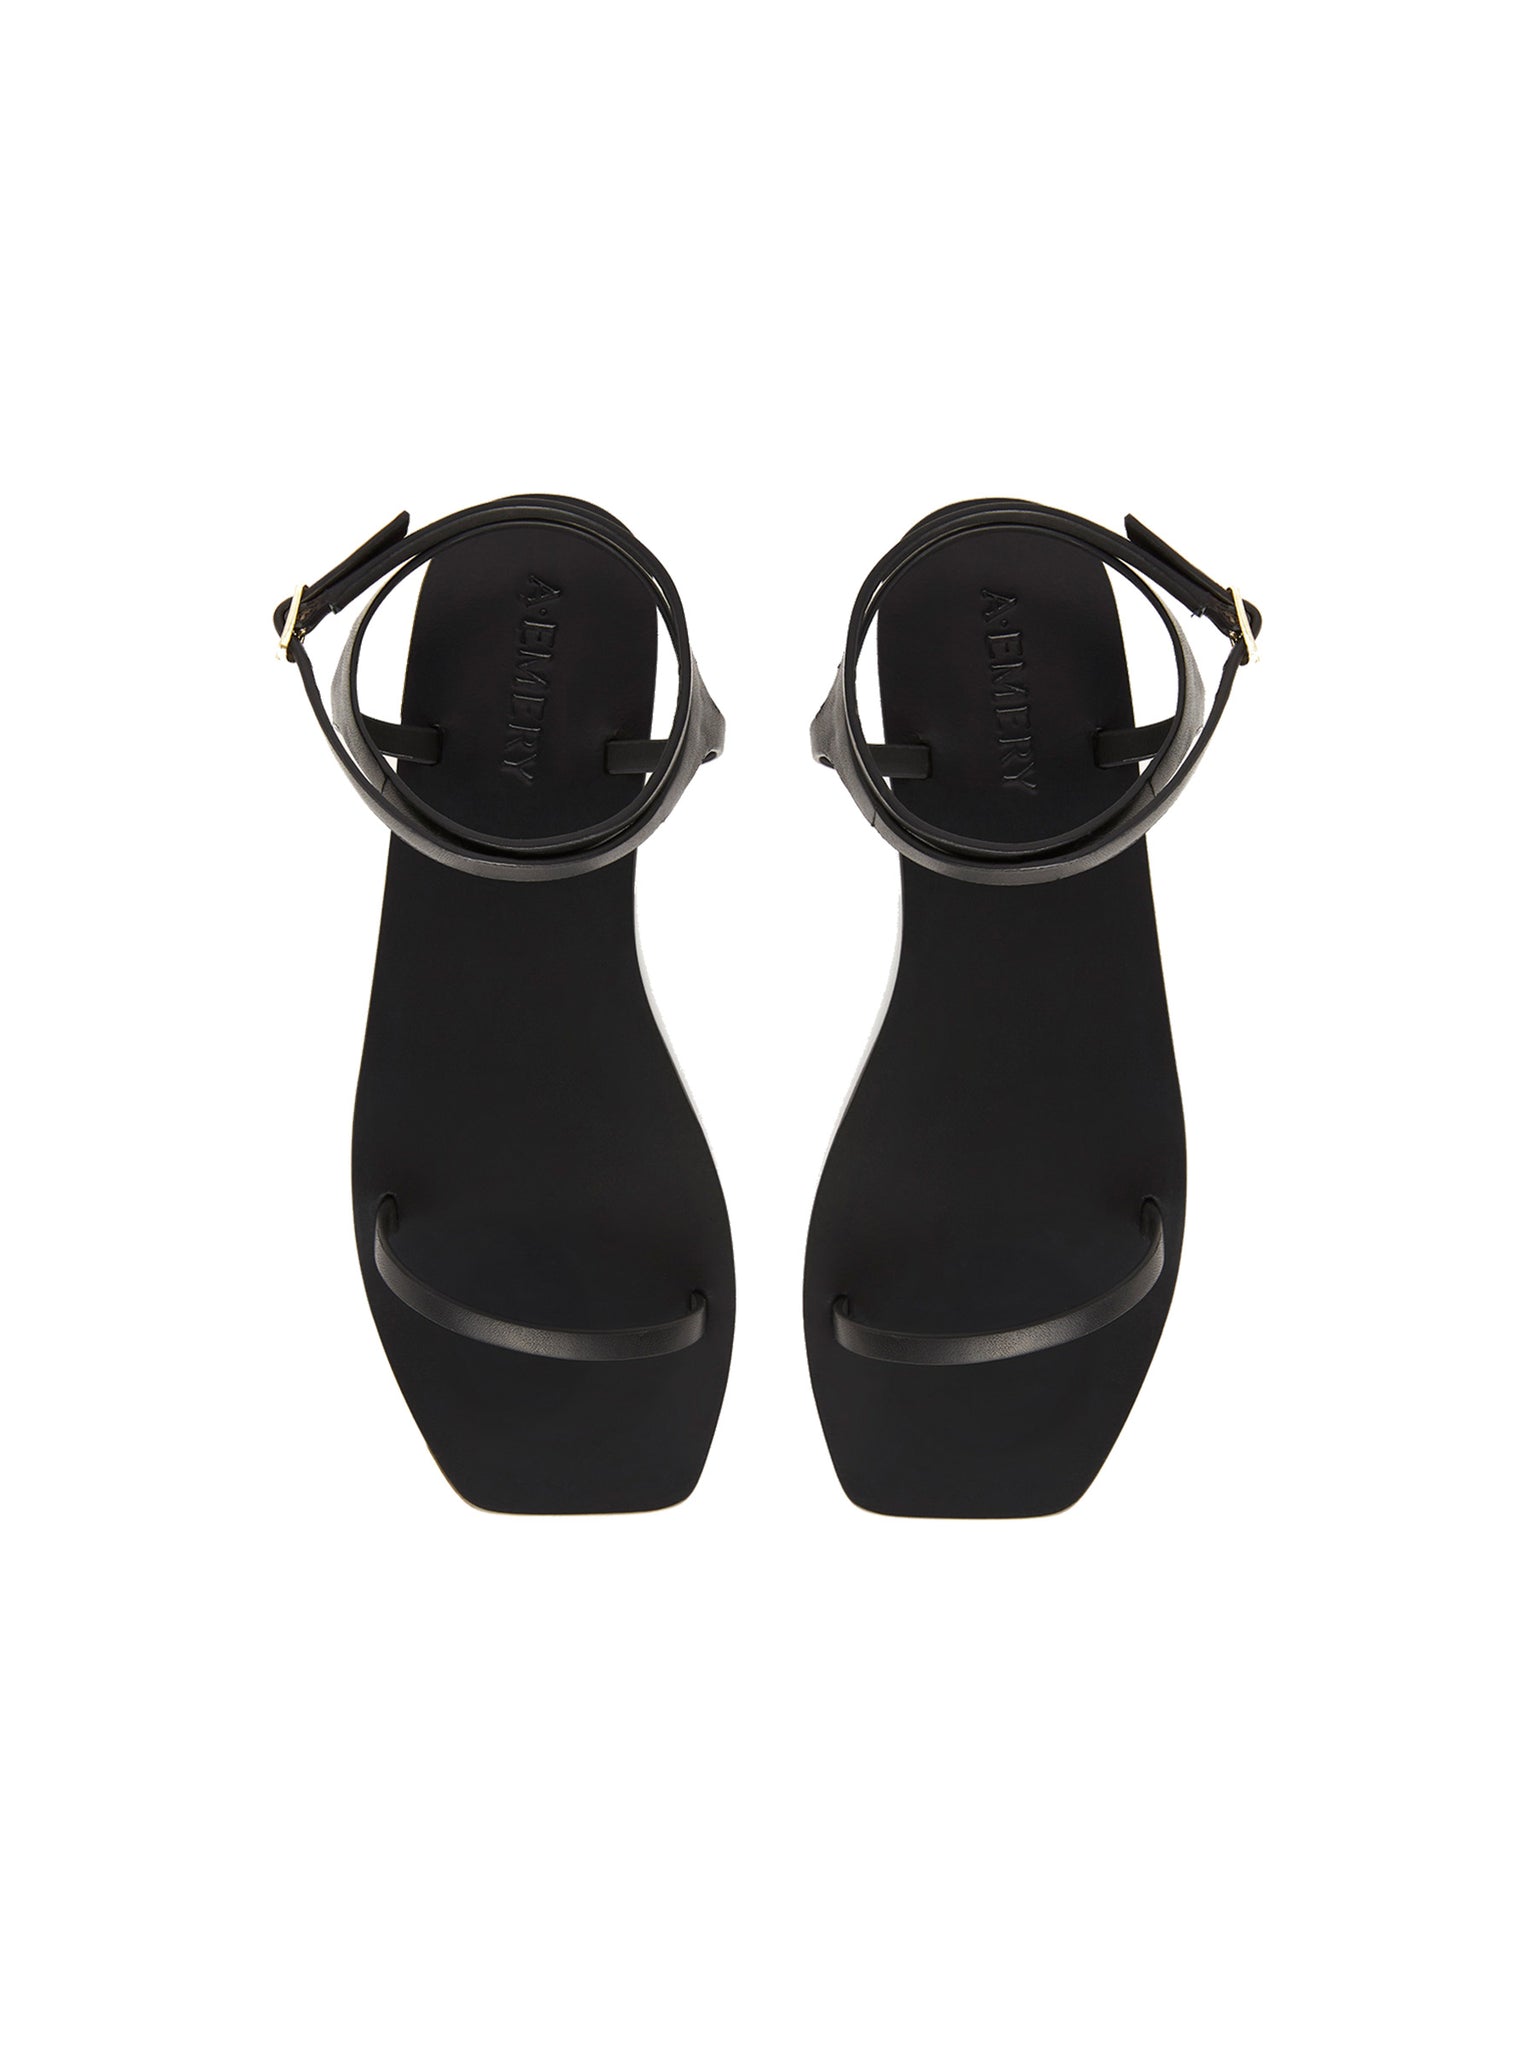 A.EMERY | Vivienne Sandal in Black | The UNDONE by A.Emery